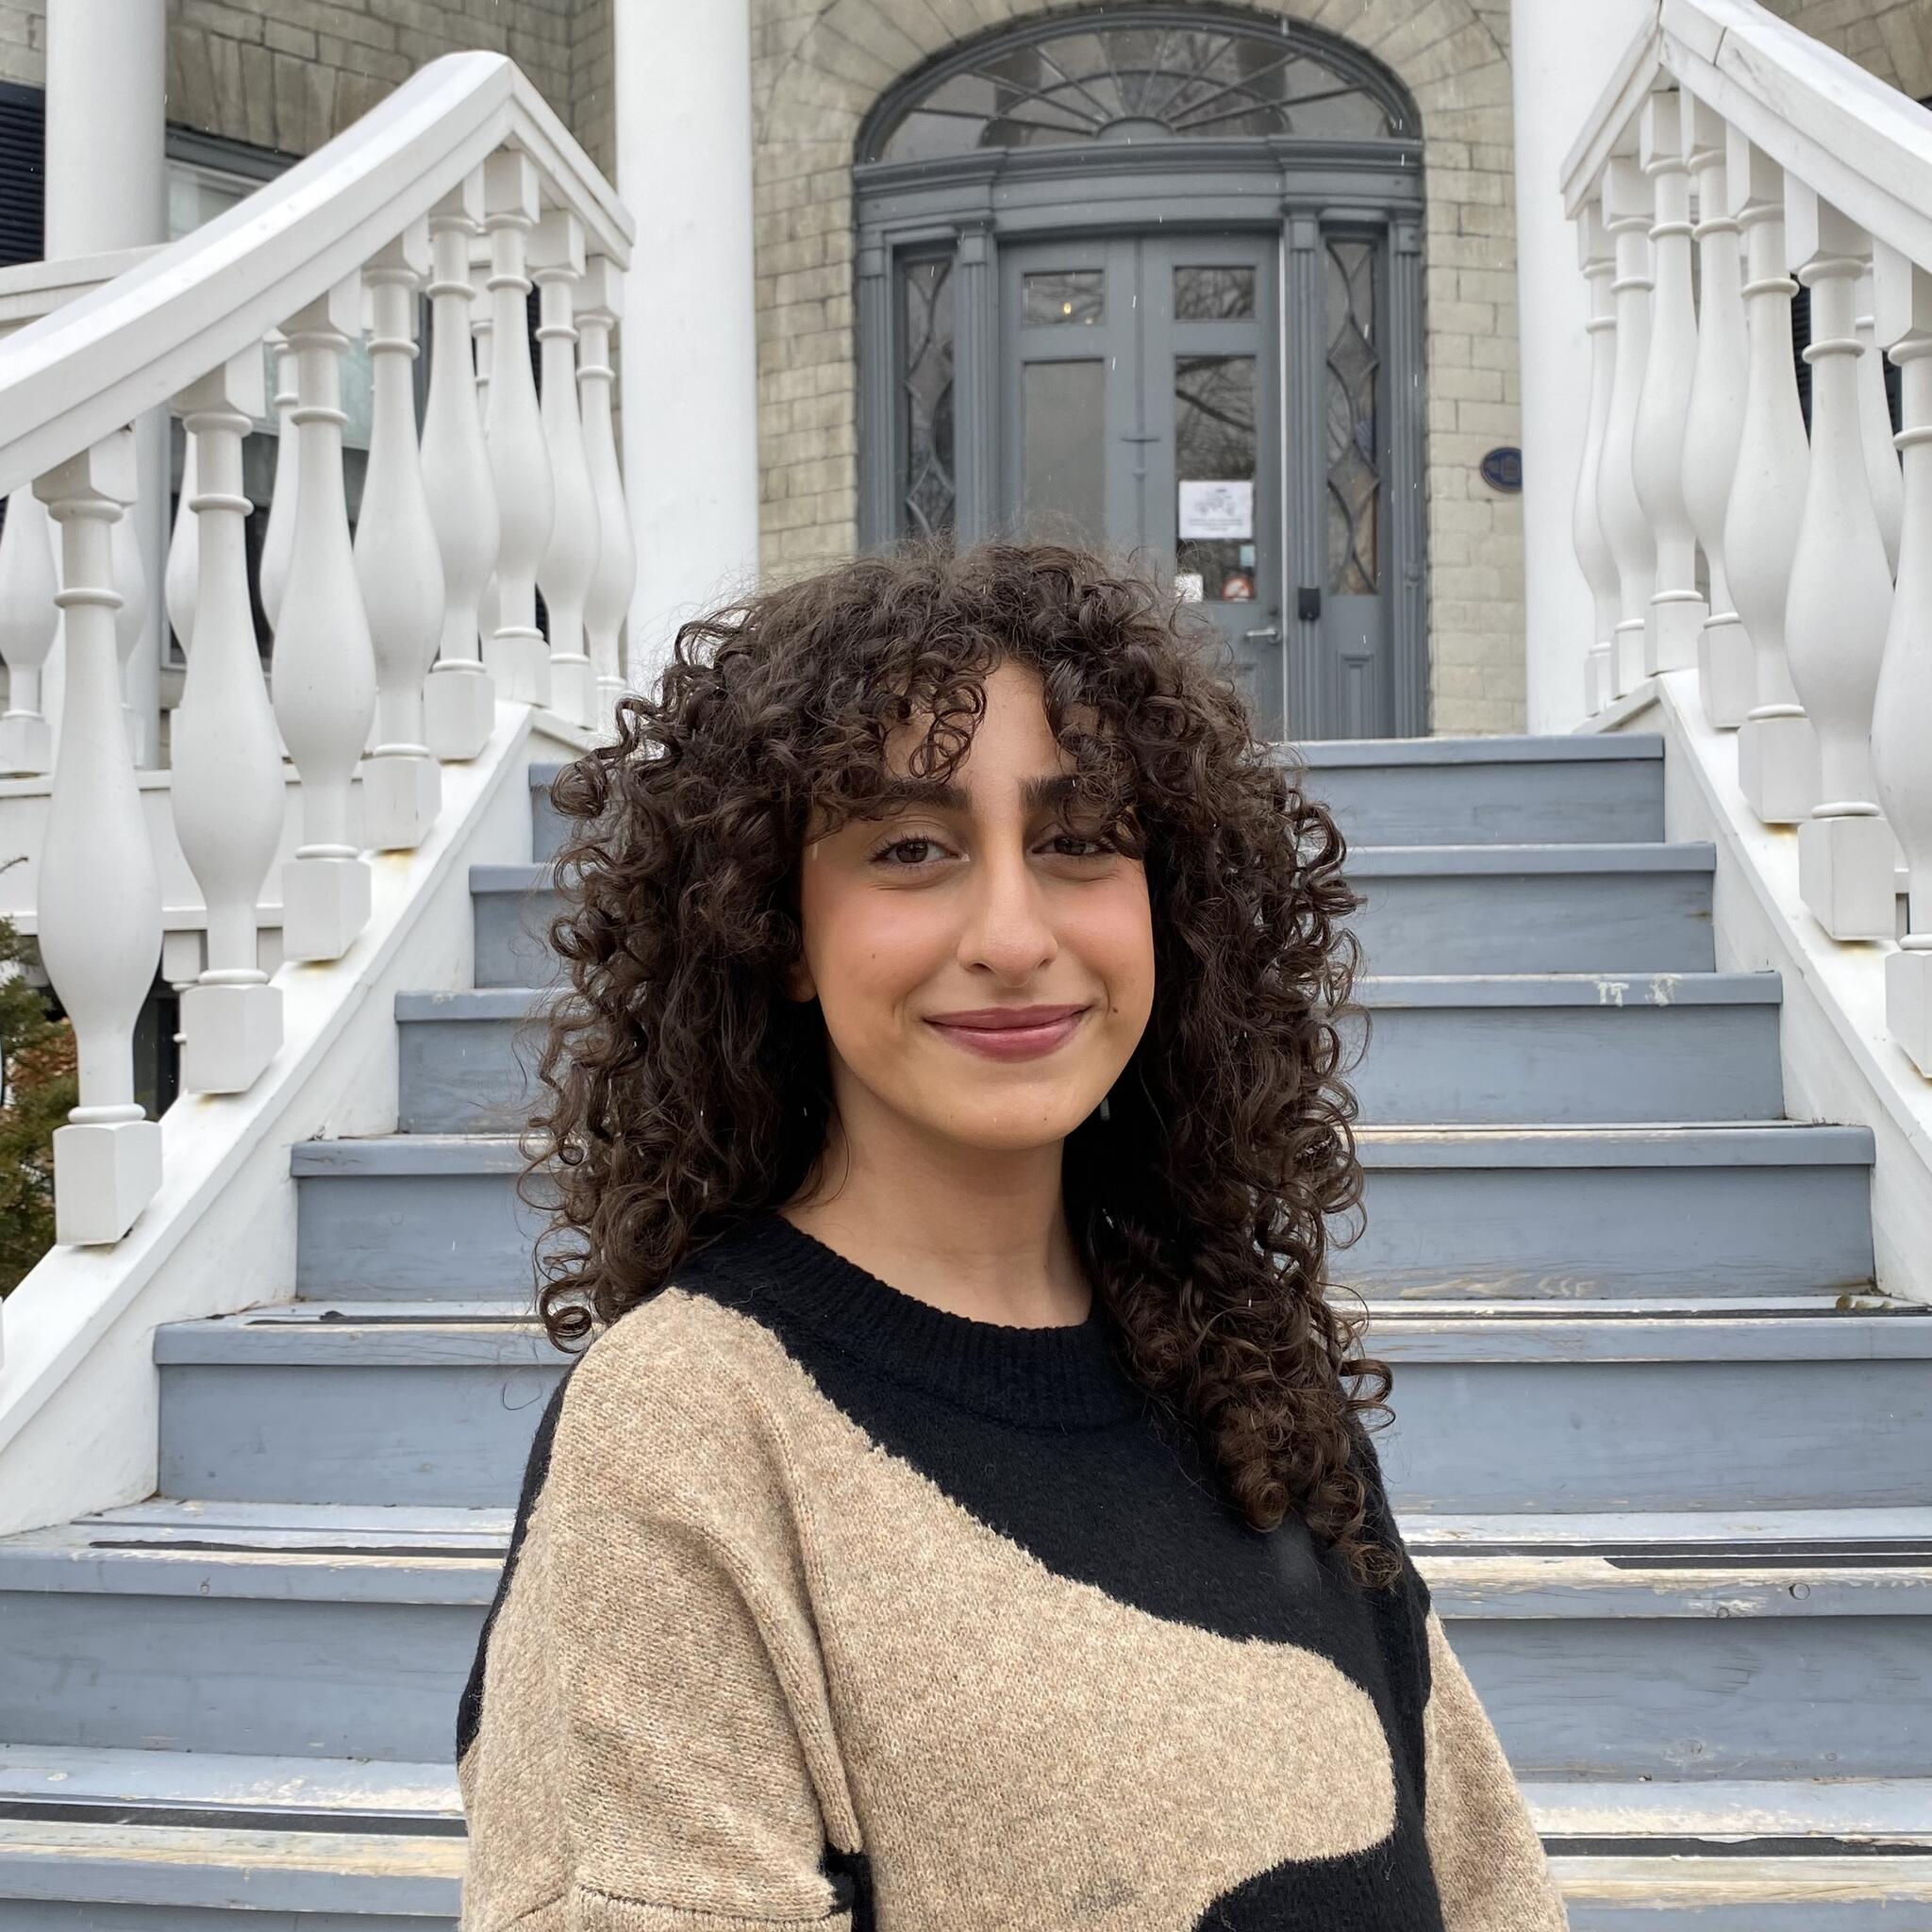 young smiling person with curly hair in front of stairs